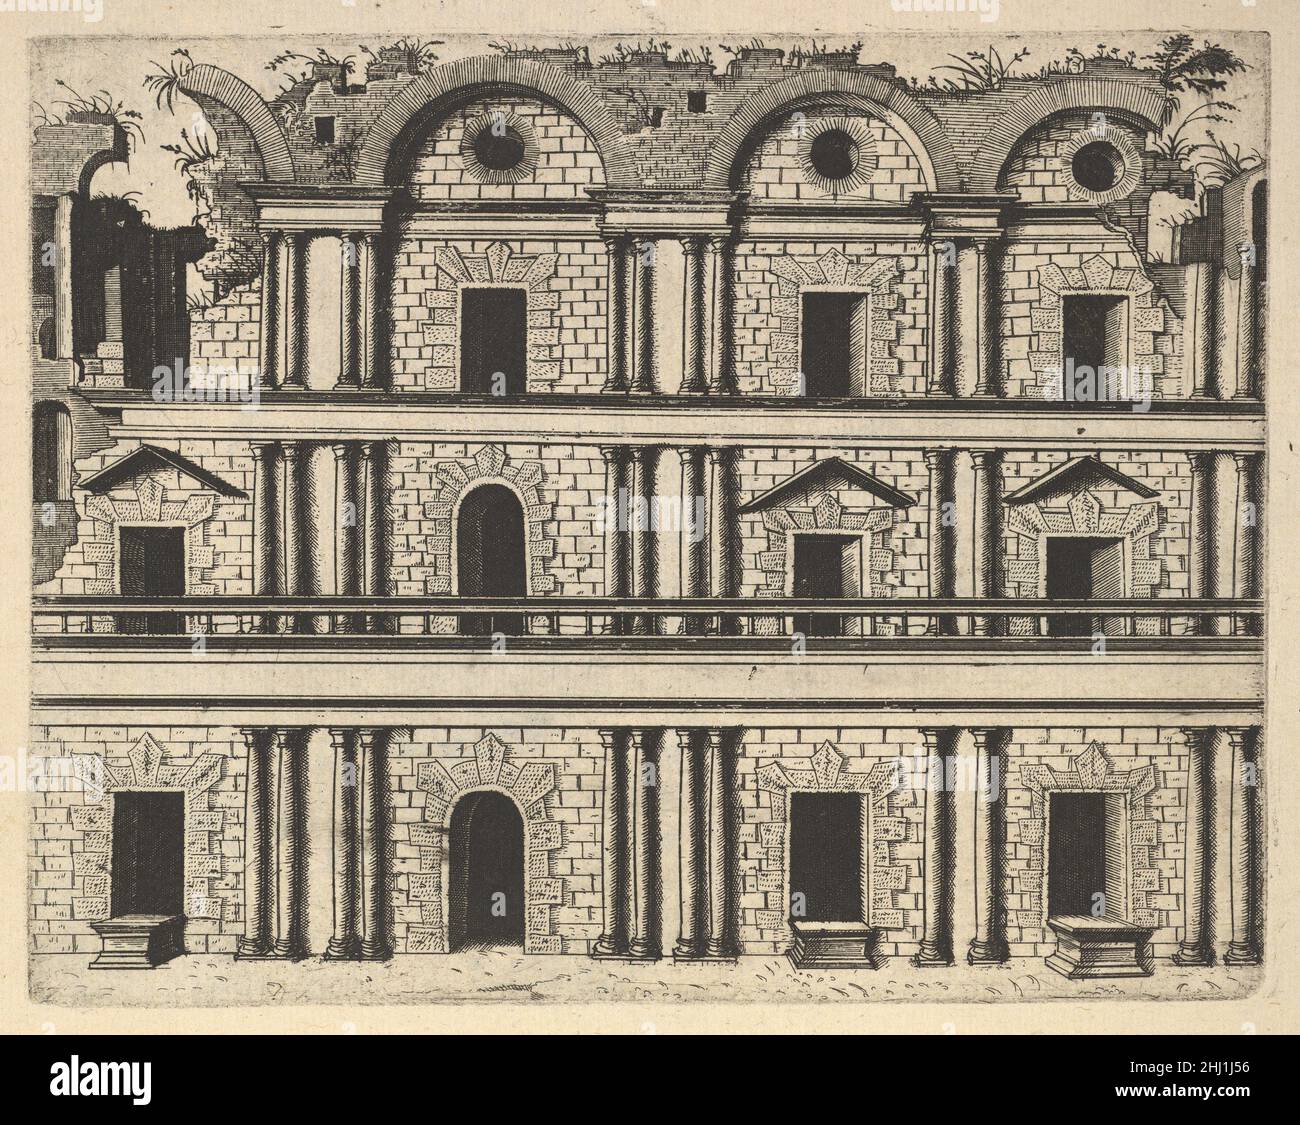 Ruin of a Palace Facade [Palatium M. Agrippa] from the series 'Ruinarum variarum fabricarum delineationes pictoribus caeterisque id genus artificibus multum utiles' 1554 Lambert Suavius Netherlandish Frontal view of the façade of a palace, said to be that of Emperor Marcus Agrippa. The rusticated façade consists of three stories crowned by an attica with arches and small round windows. The façade is divided in four bays each with a window or door open to the exterior. Double Doric pillars flank the windows. Along the sides and top of the building damage is visible. It is not clear whether this Stock Photo